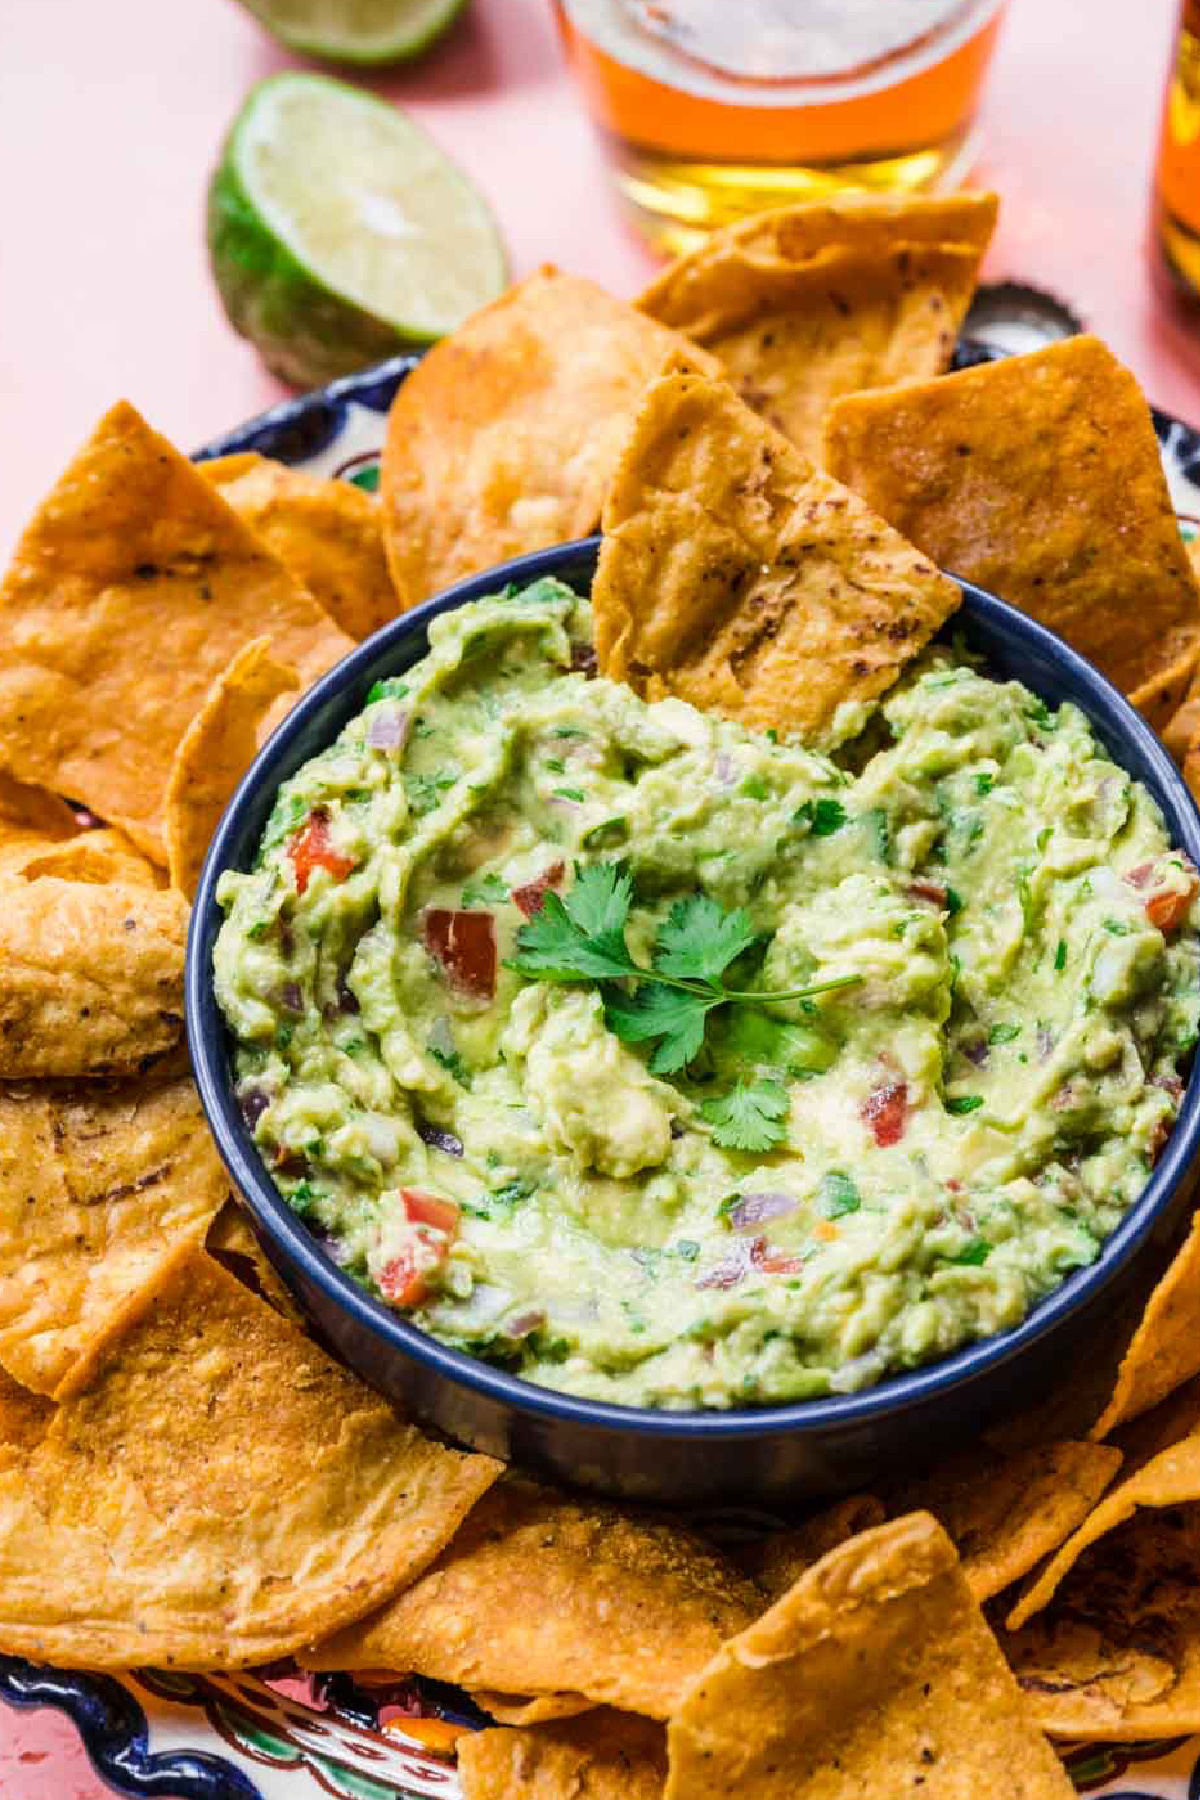 Cheap Party Foods - Tortilla Chips with Guacamole